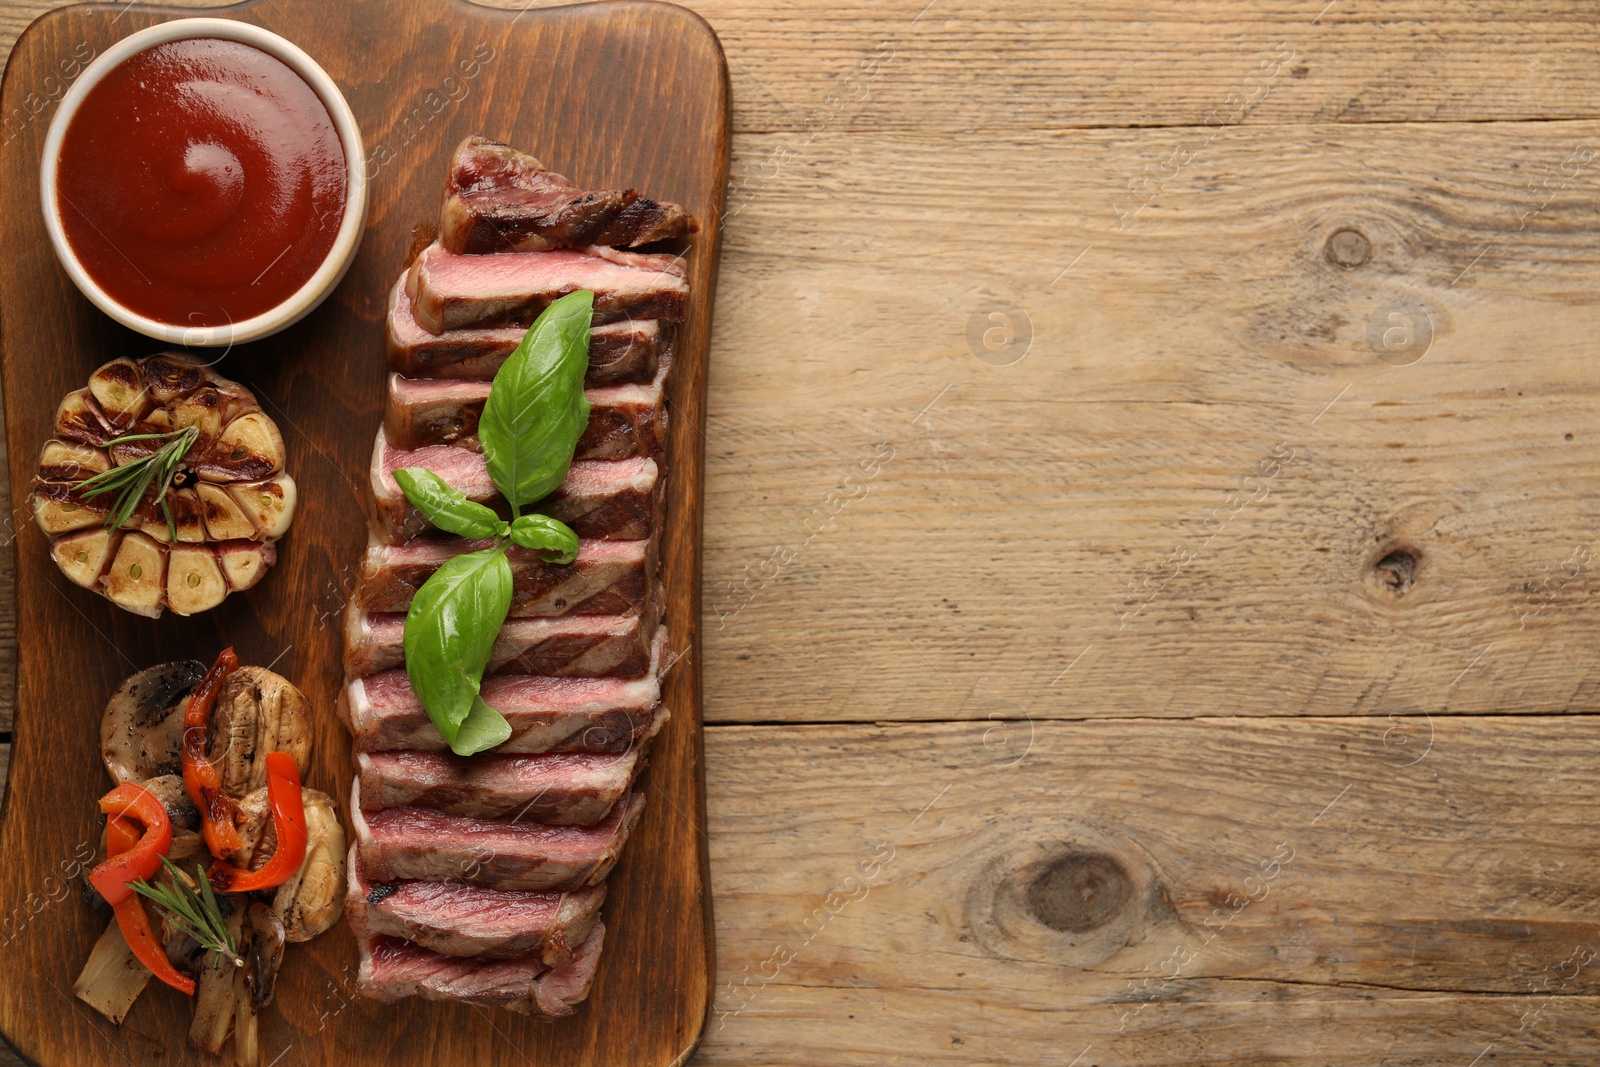 Photo of Delicious grilled beef steak with spices and tomato sauce on wooden table, top view. Space for text